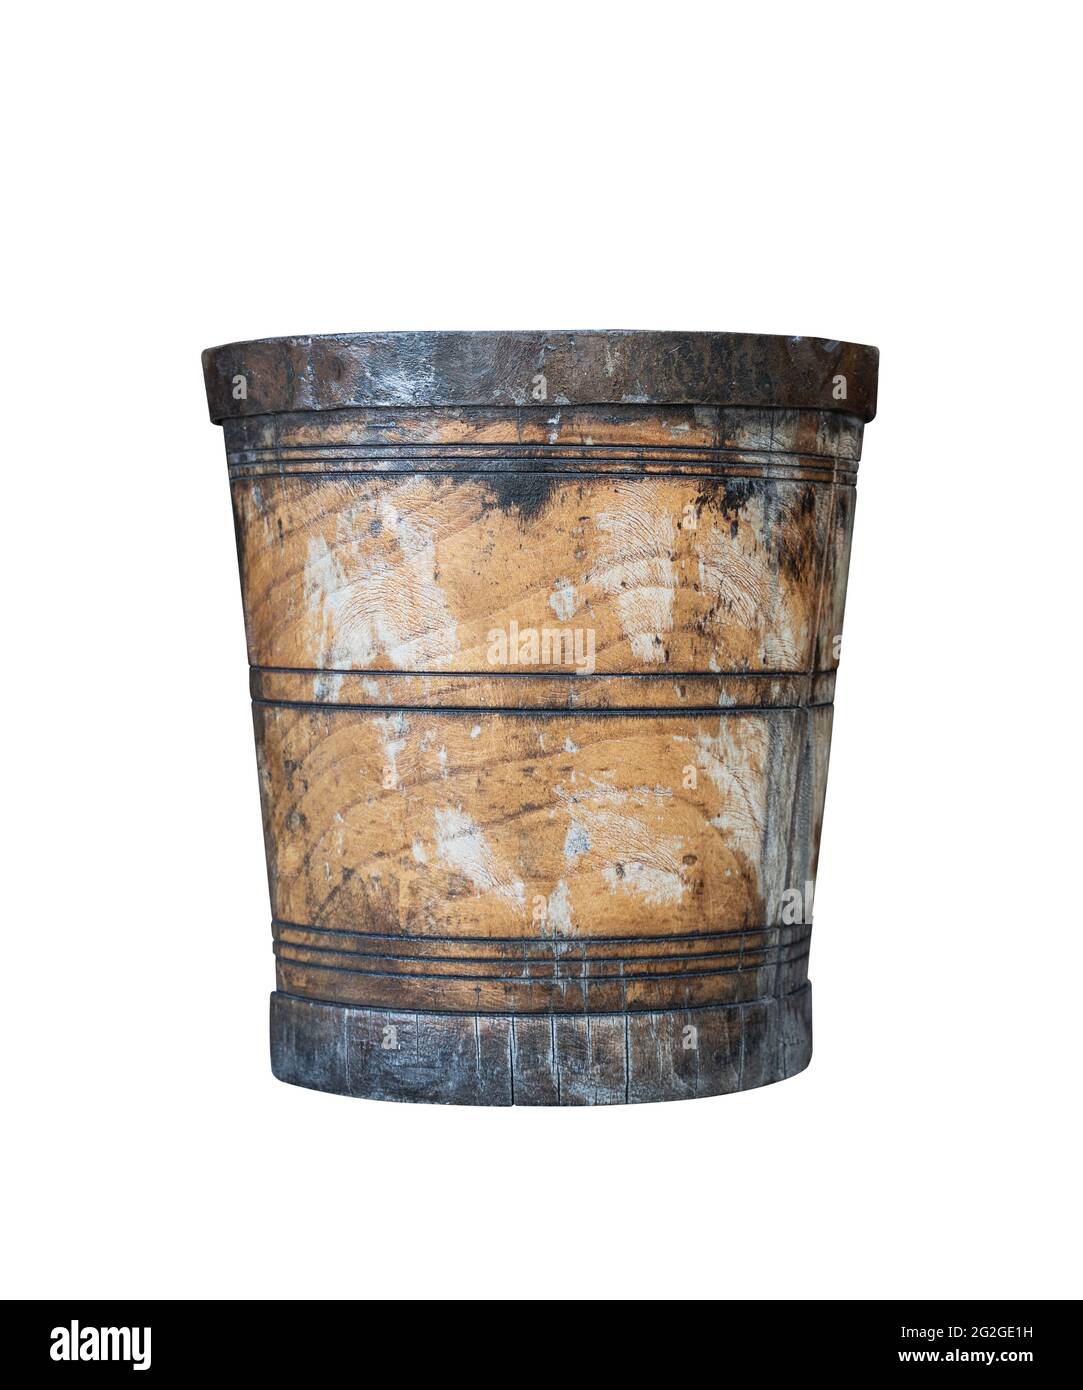 front view closeup of aged wooden bucket with metal rings isolated on white background Stock Photo